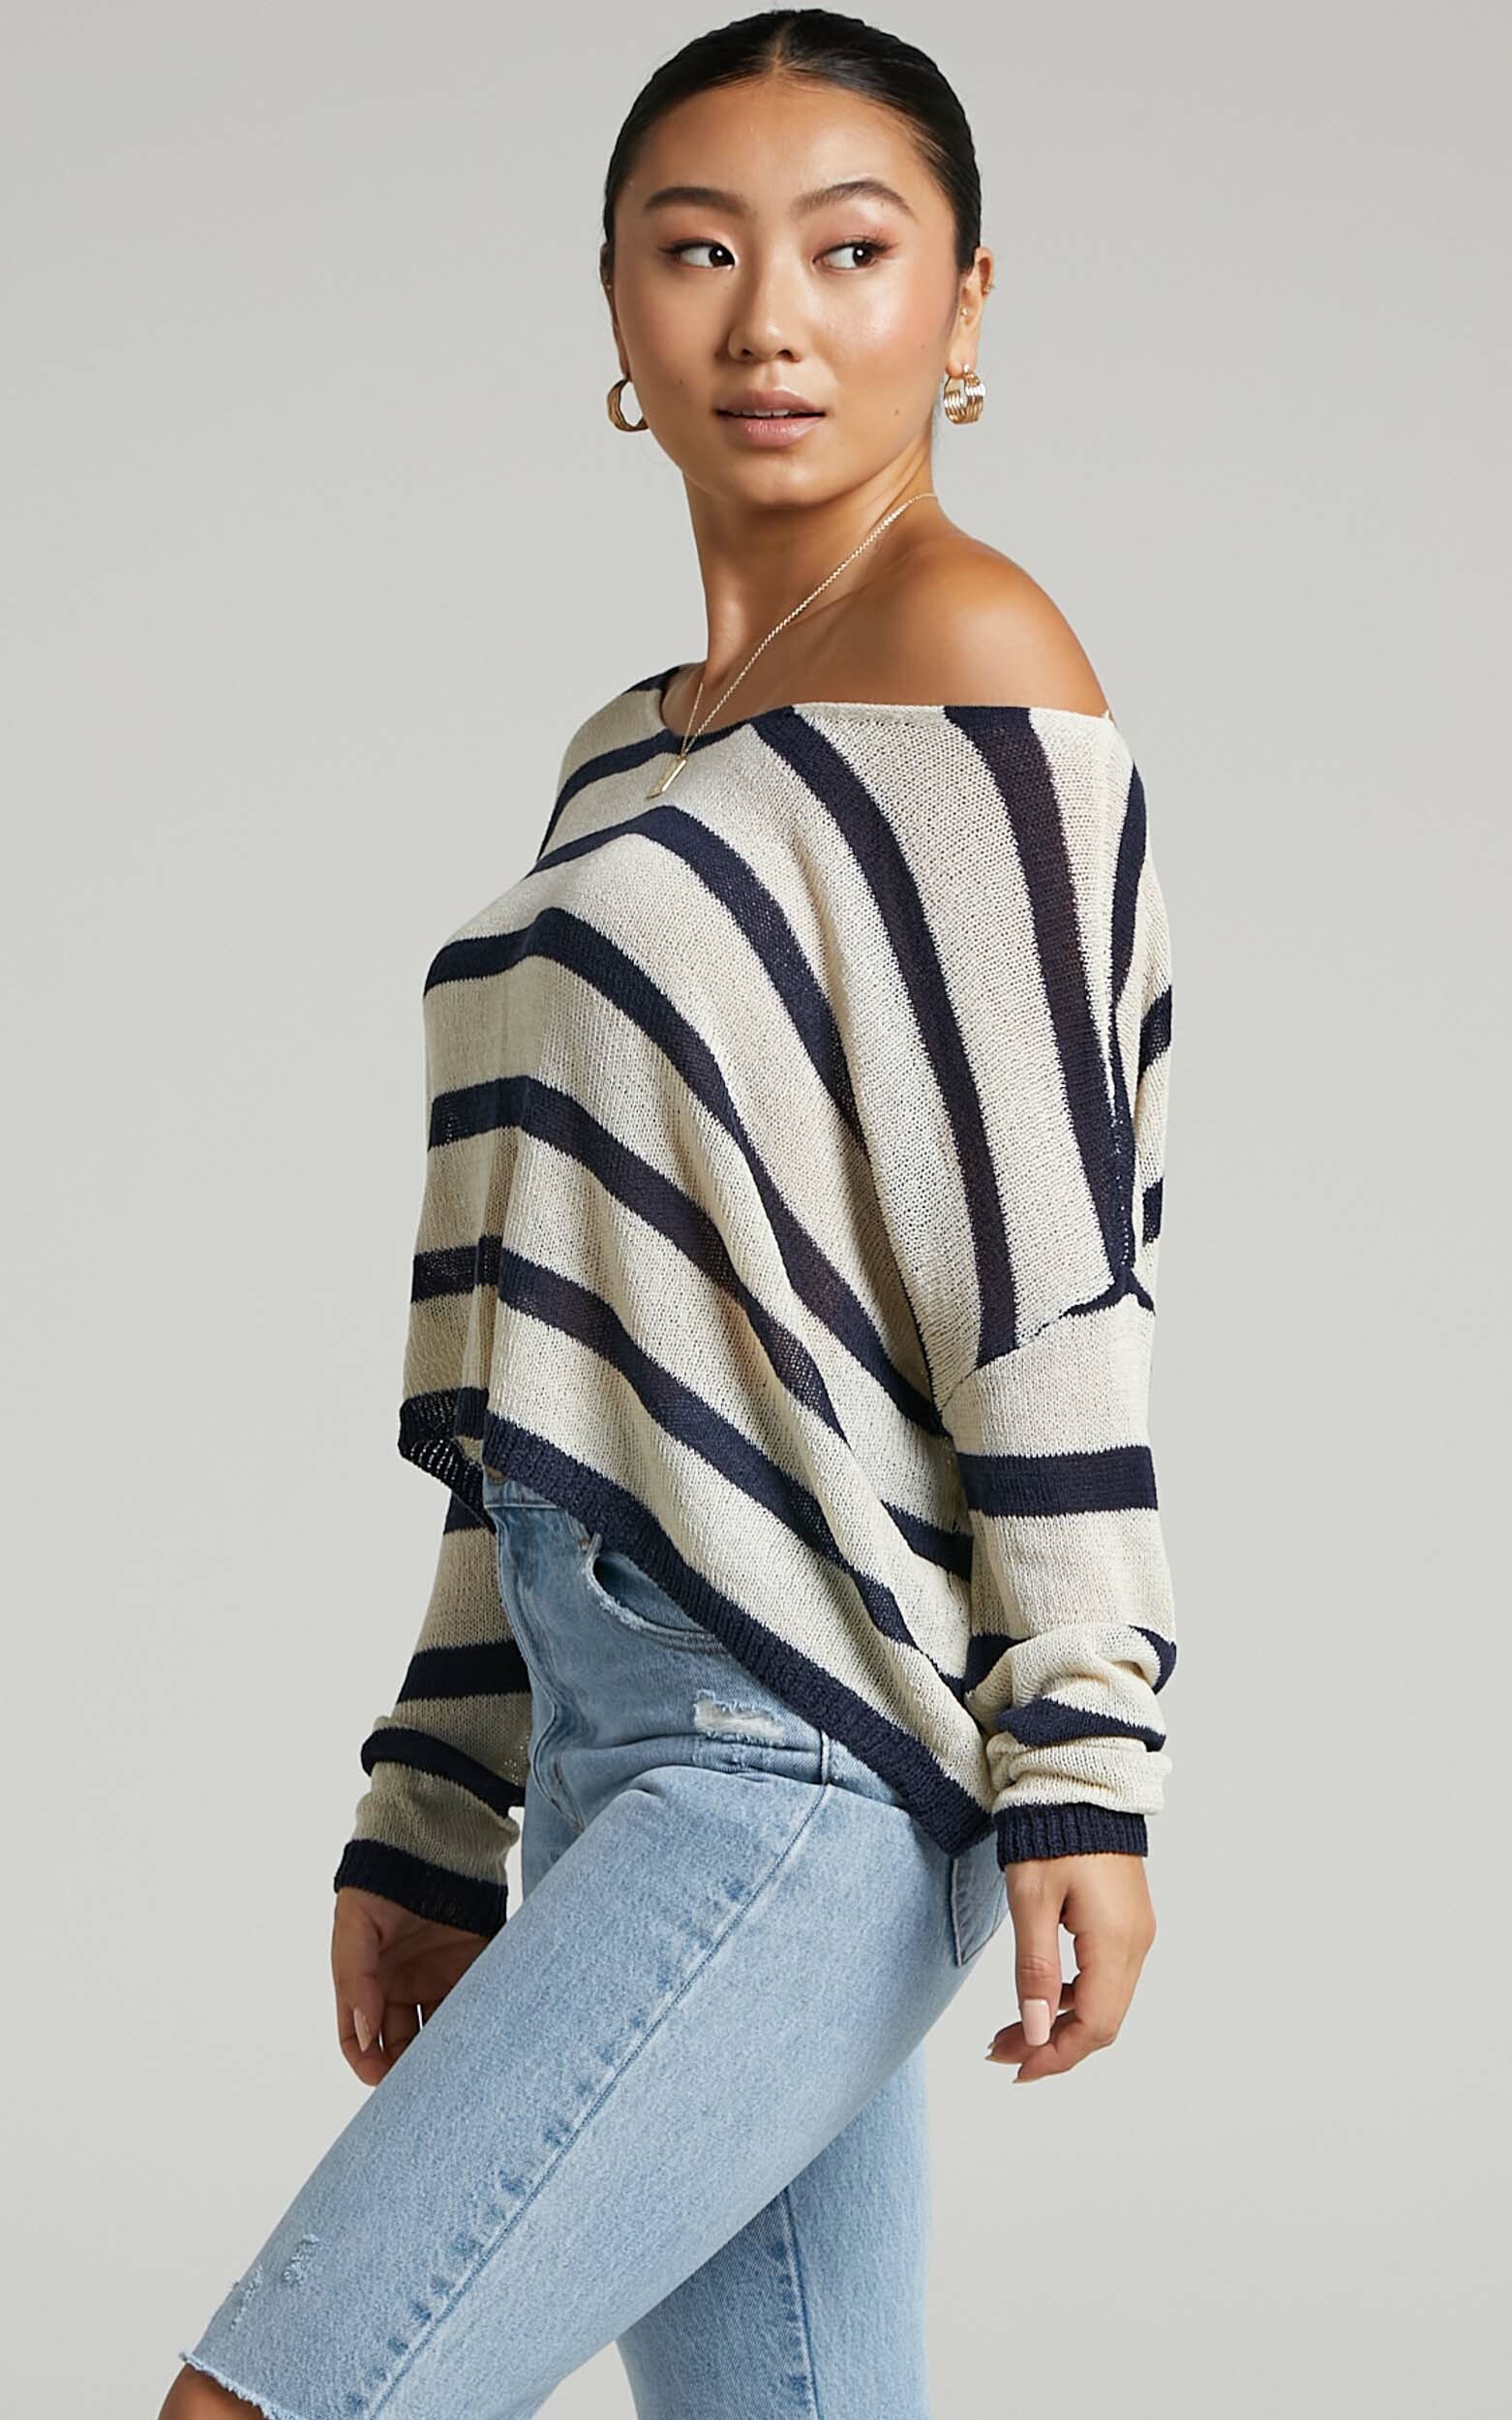 Dhani Relaxed Woven Knit Top in Navy Stripe - 04, NVY1, hi-res image number null